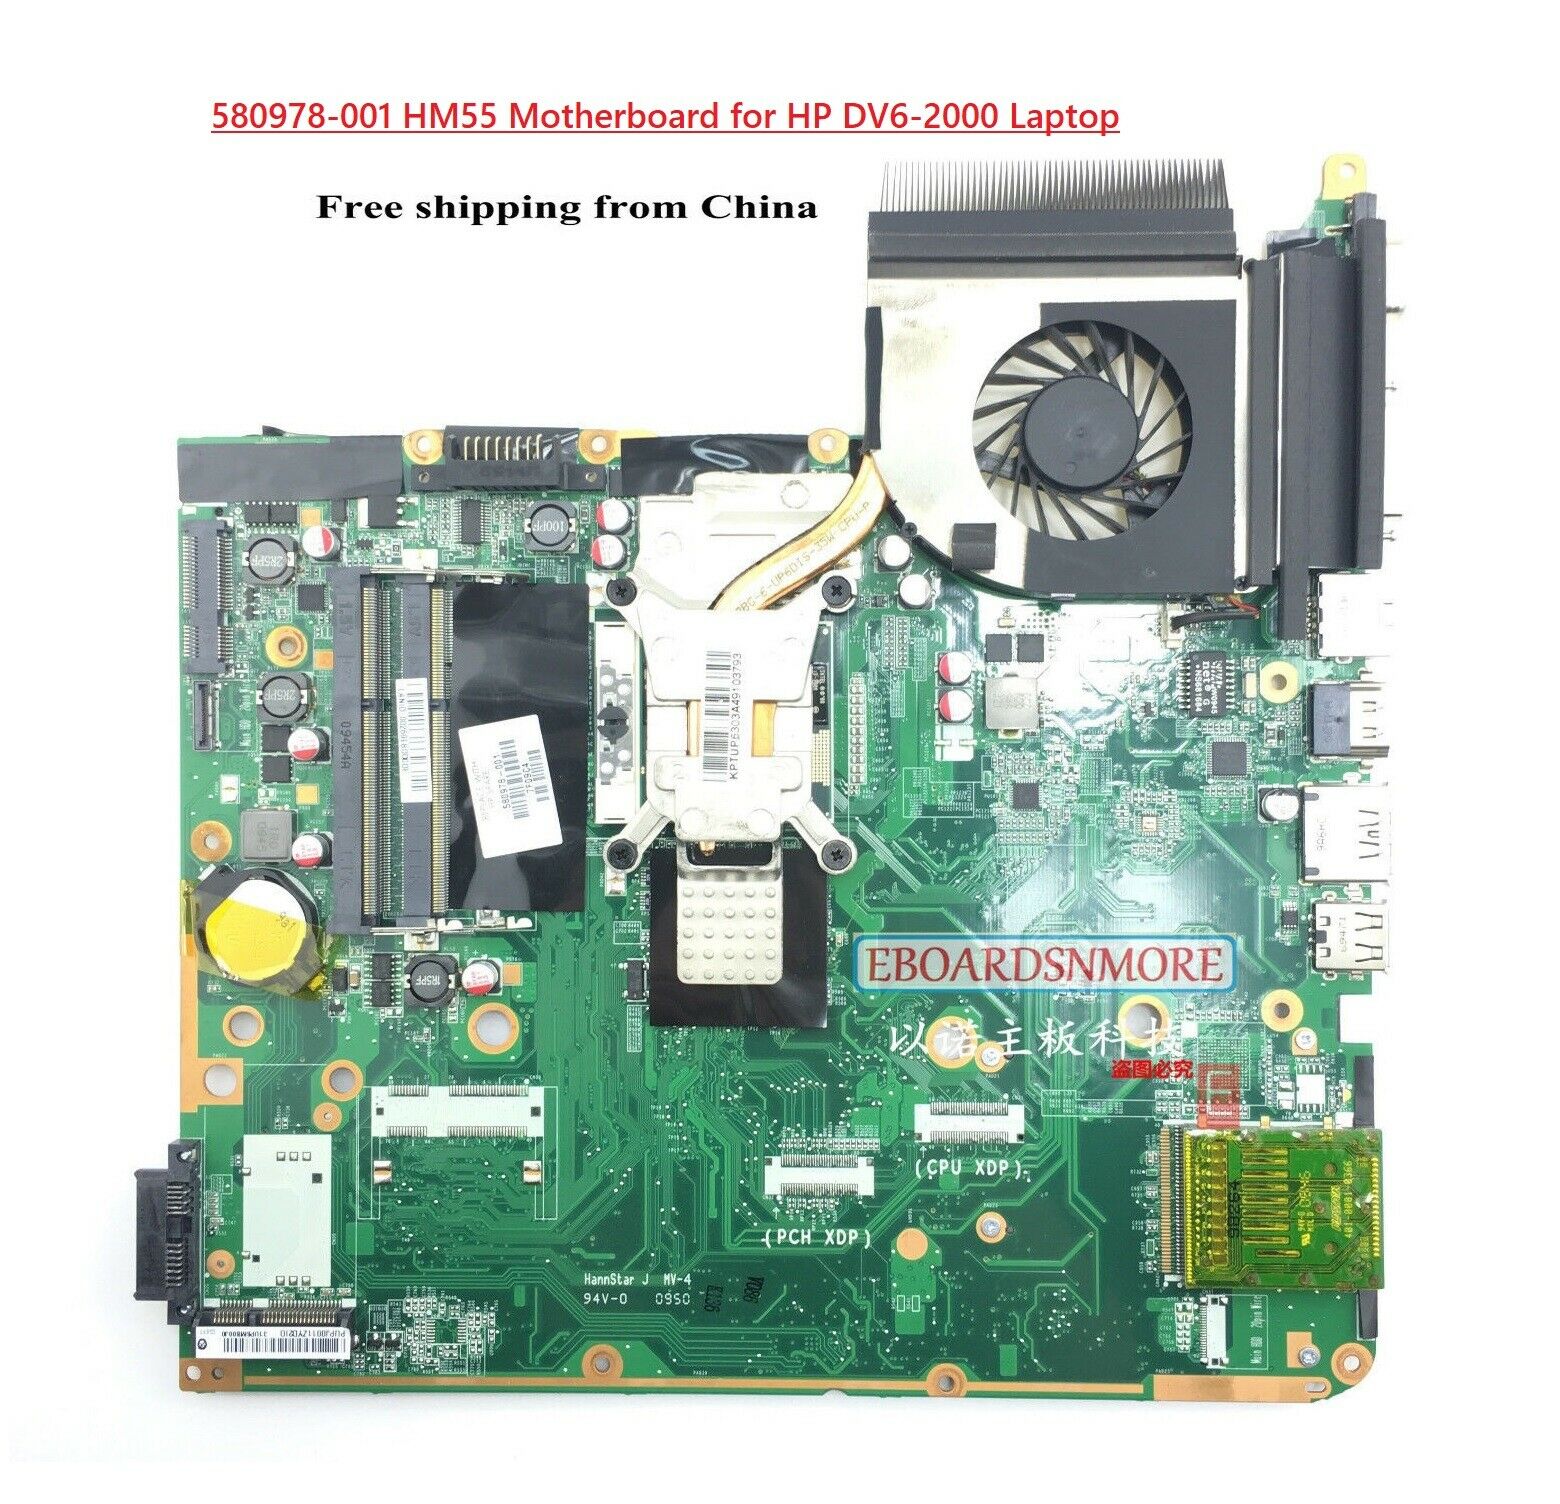 580978-001 Intel Motherboard Set for HP DV6-2000 Laptop, REPLACES 571188-001 MPN: 580978-001 Model: See t - Click Image to Close